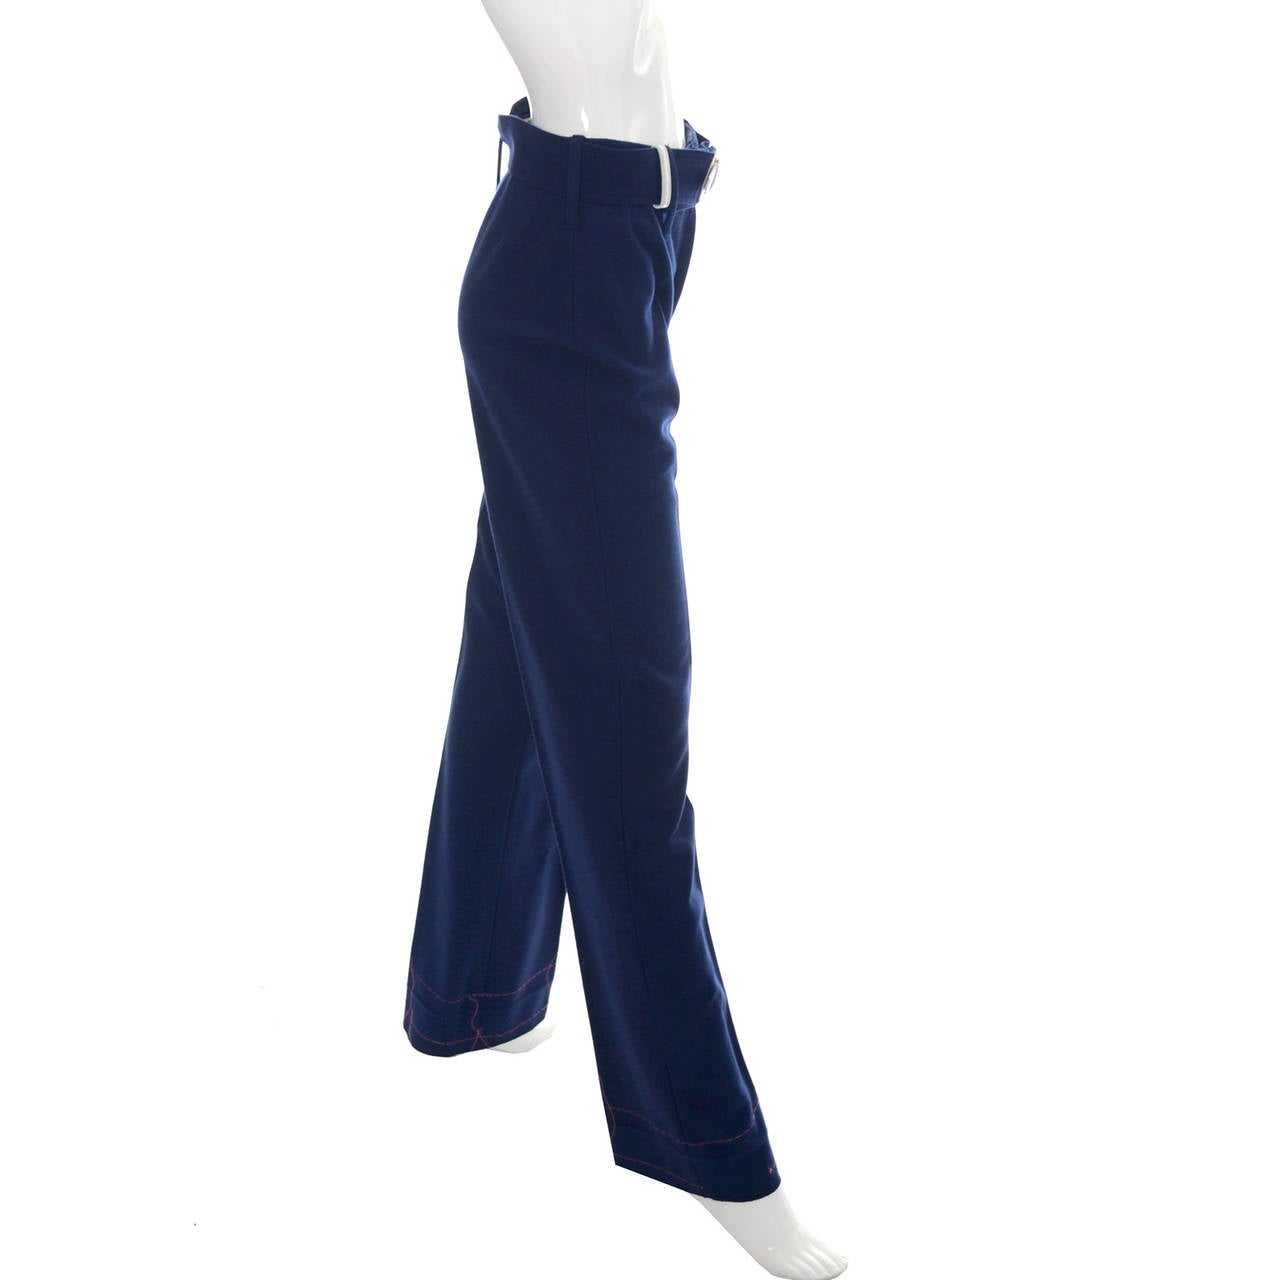 This is a pair of vintage 1970's Hermes Sport blue wool pants with original white belt that were made in France exclusively for Bonwit Teller.  These pants have never been worn and have the original thread with no hem,  showing they were never